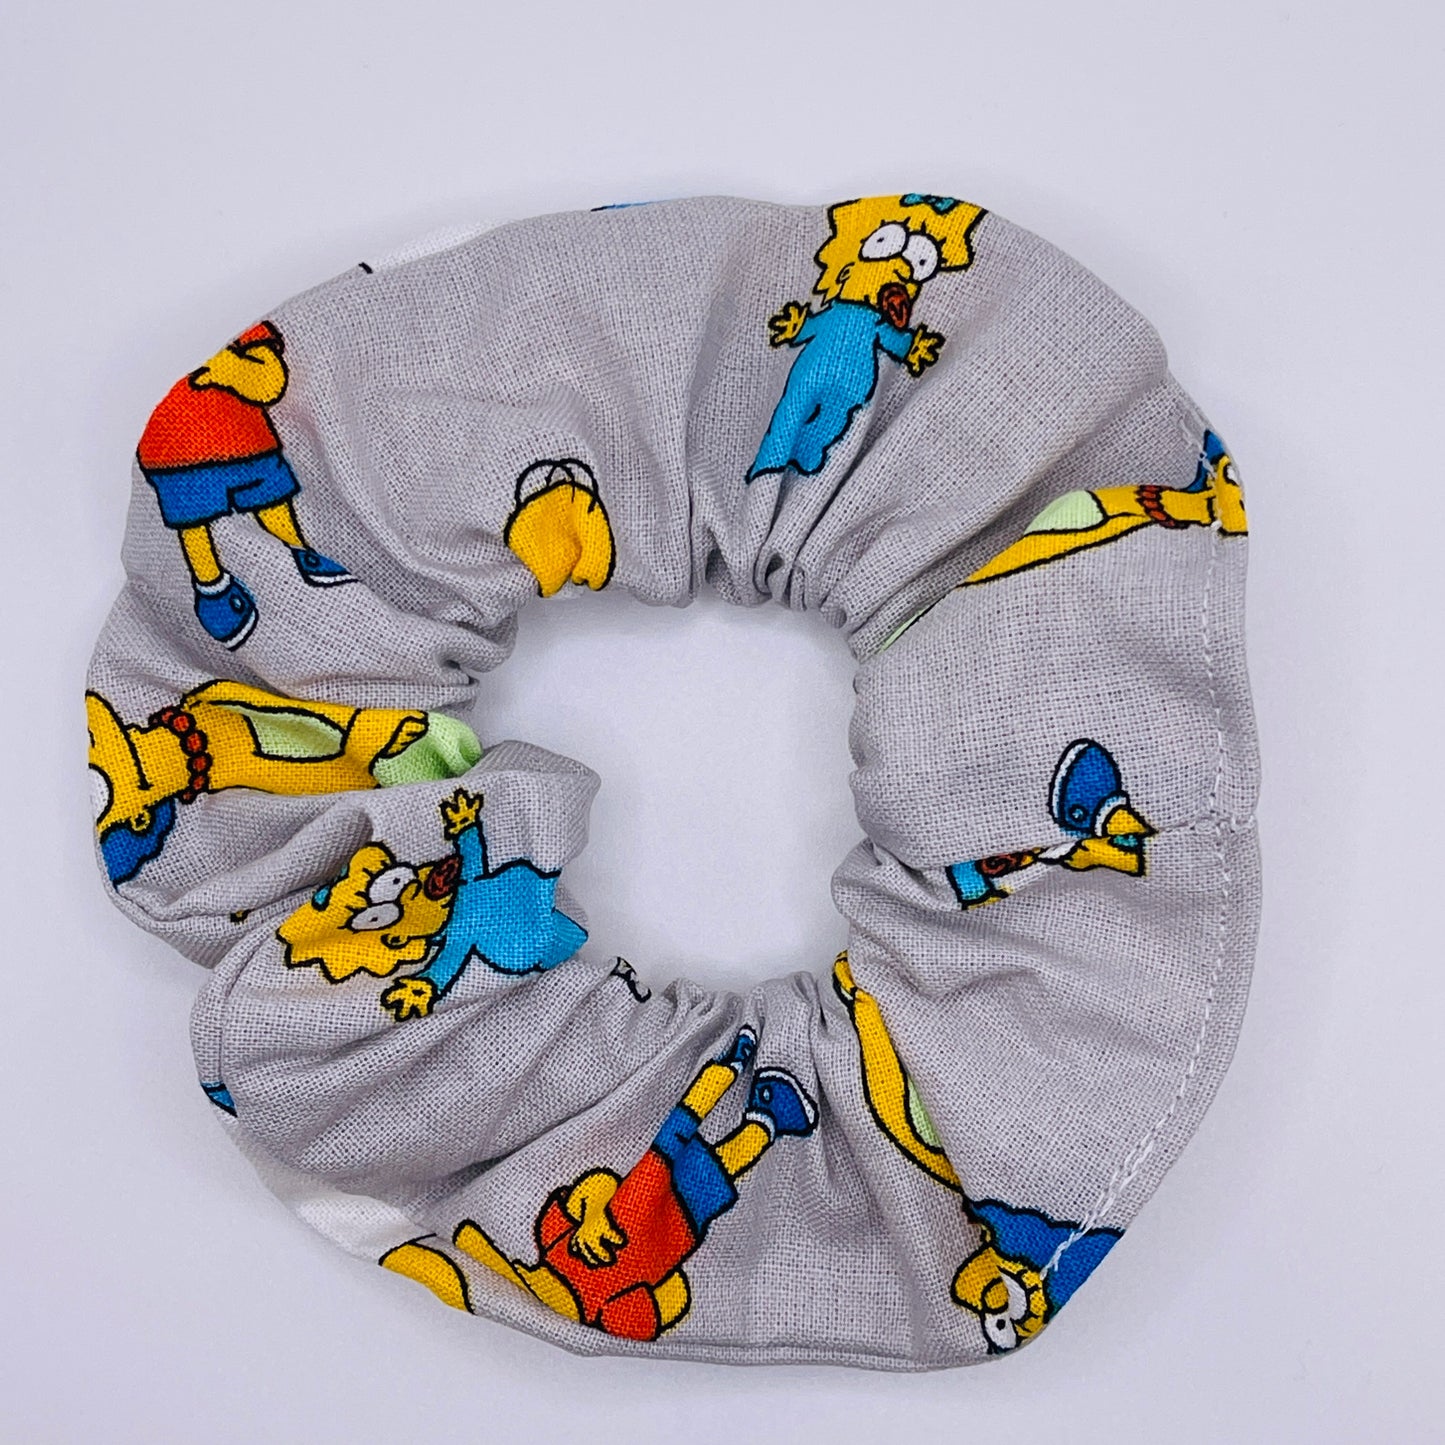 The Simpsons Scrunchies